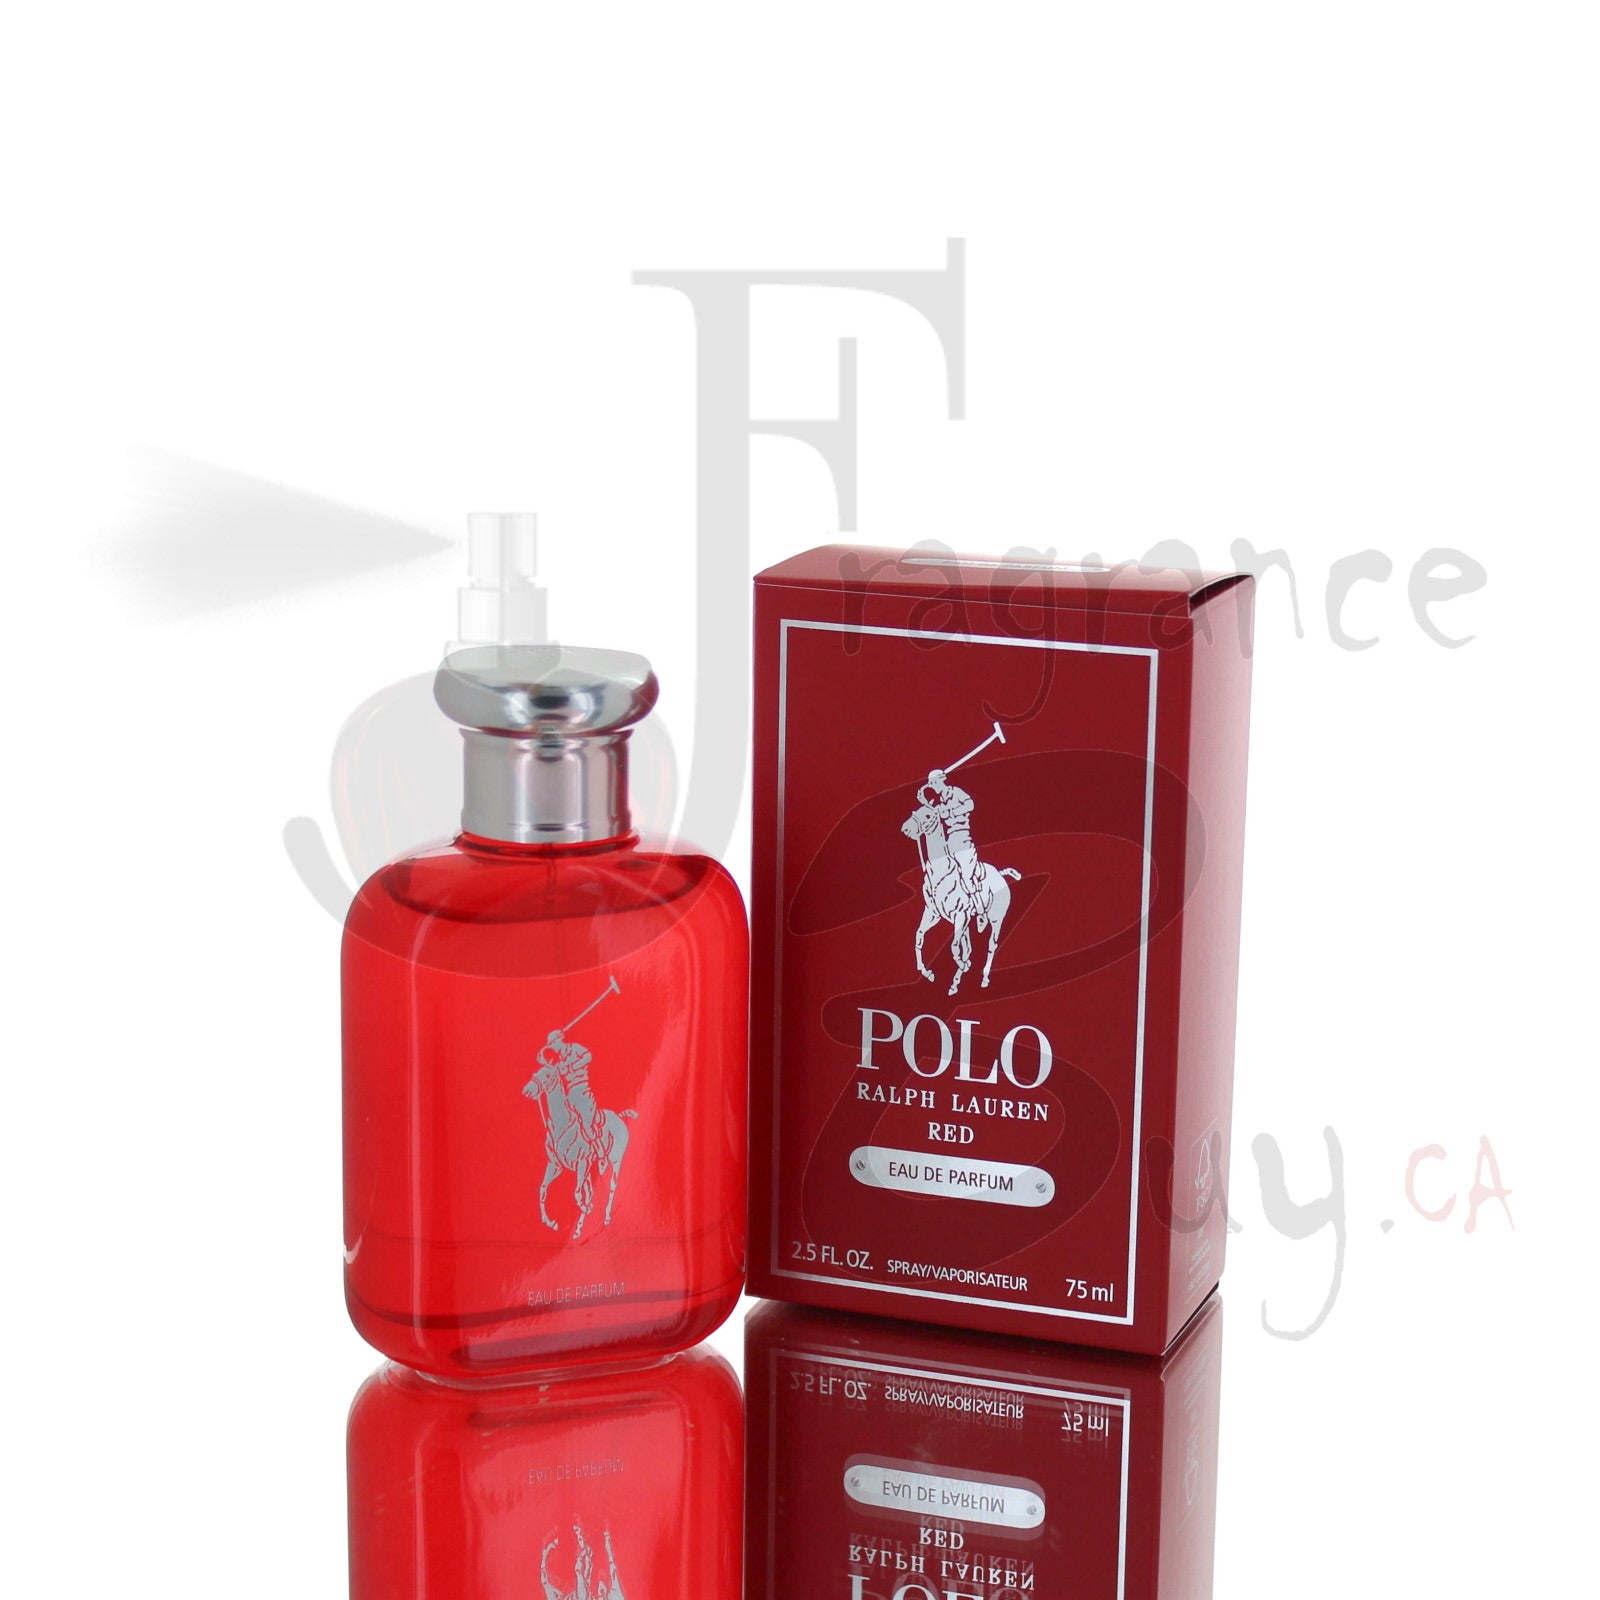  — Ralph Lauren Polo Red EDP Edition Perfume Cologne | Best  Price Fragbuy